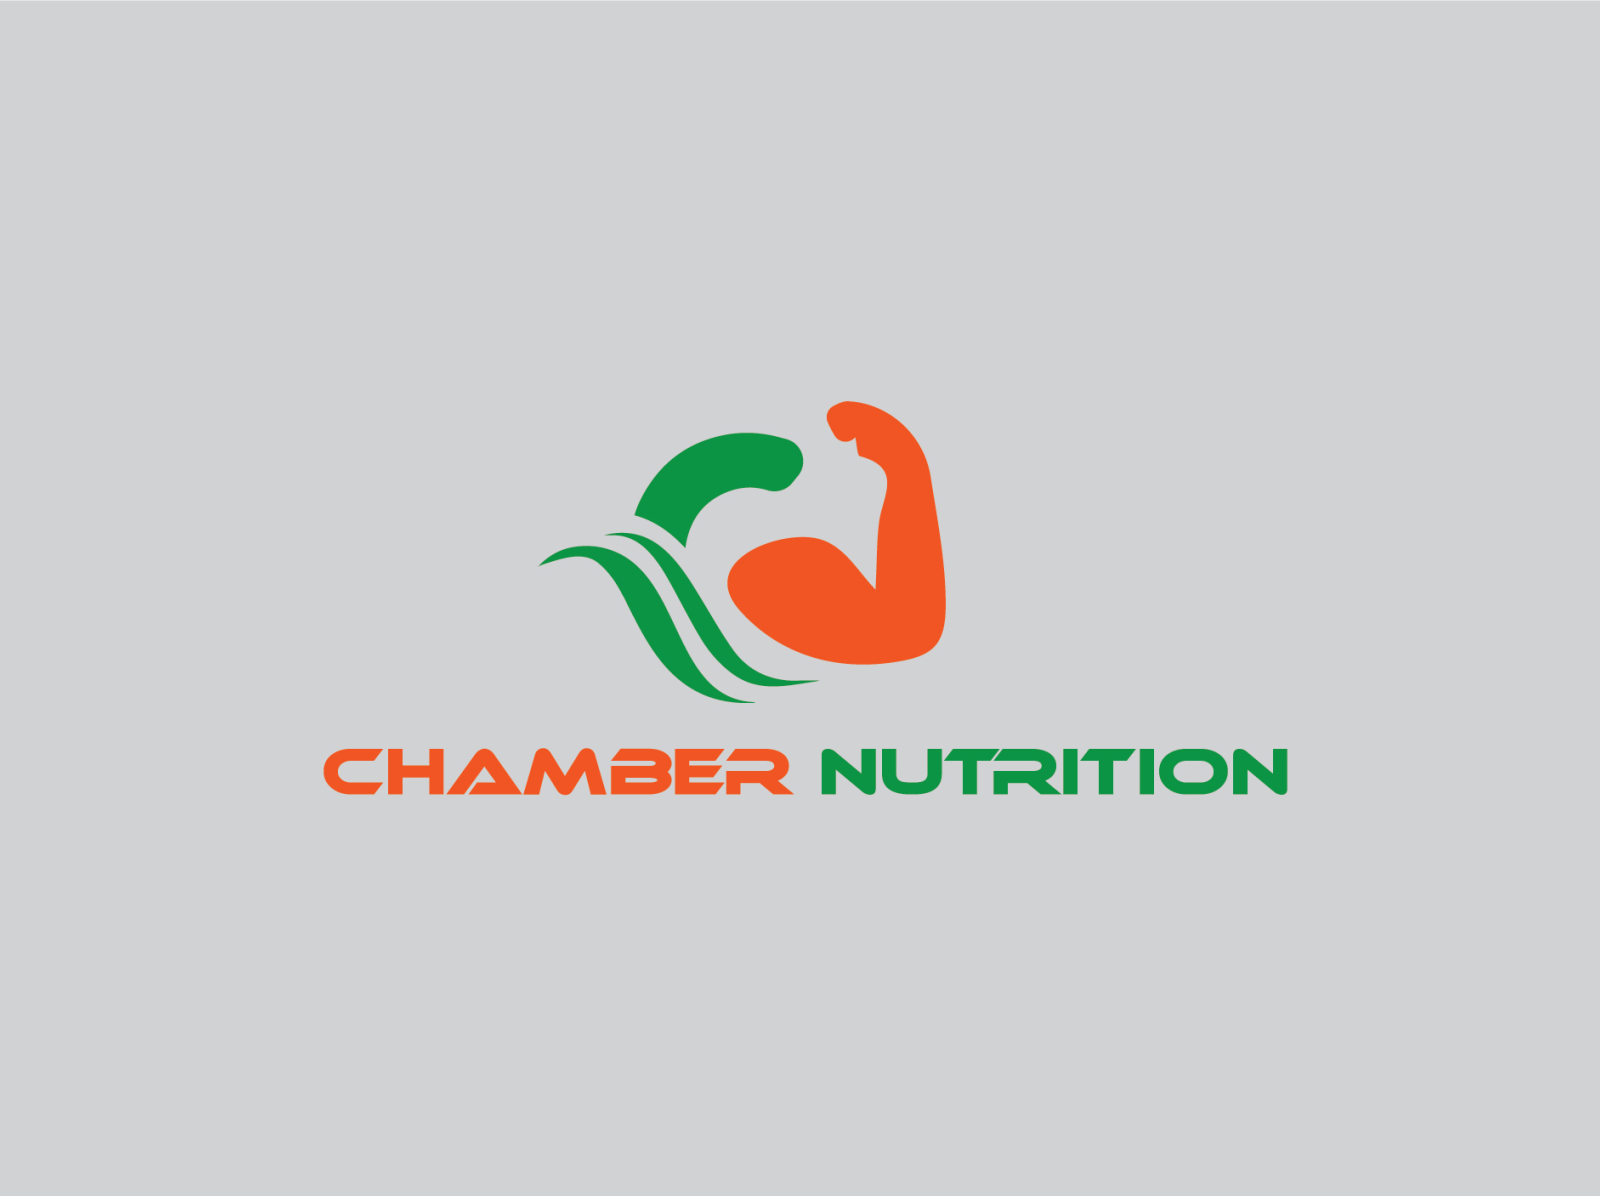 Logo For Nutritional Company Ii Logo Design By Graphic Fuad On Dribbble 2703